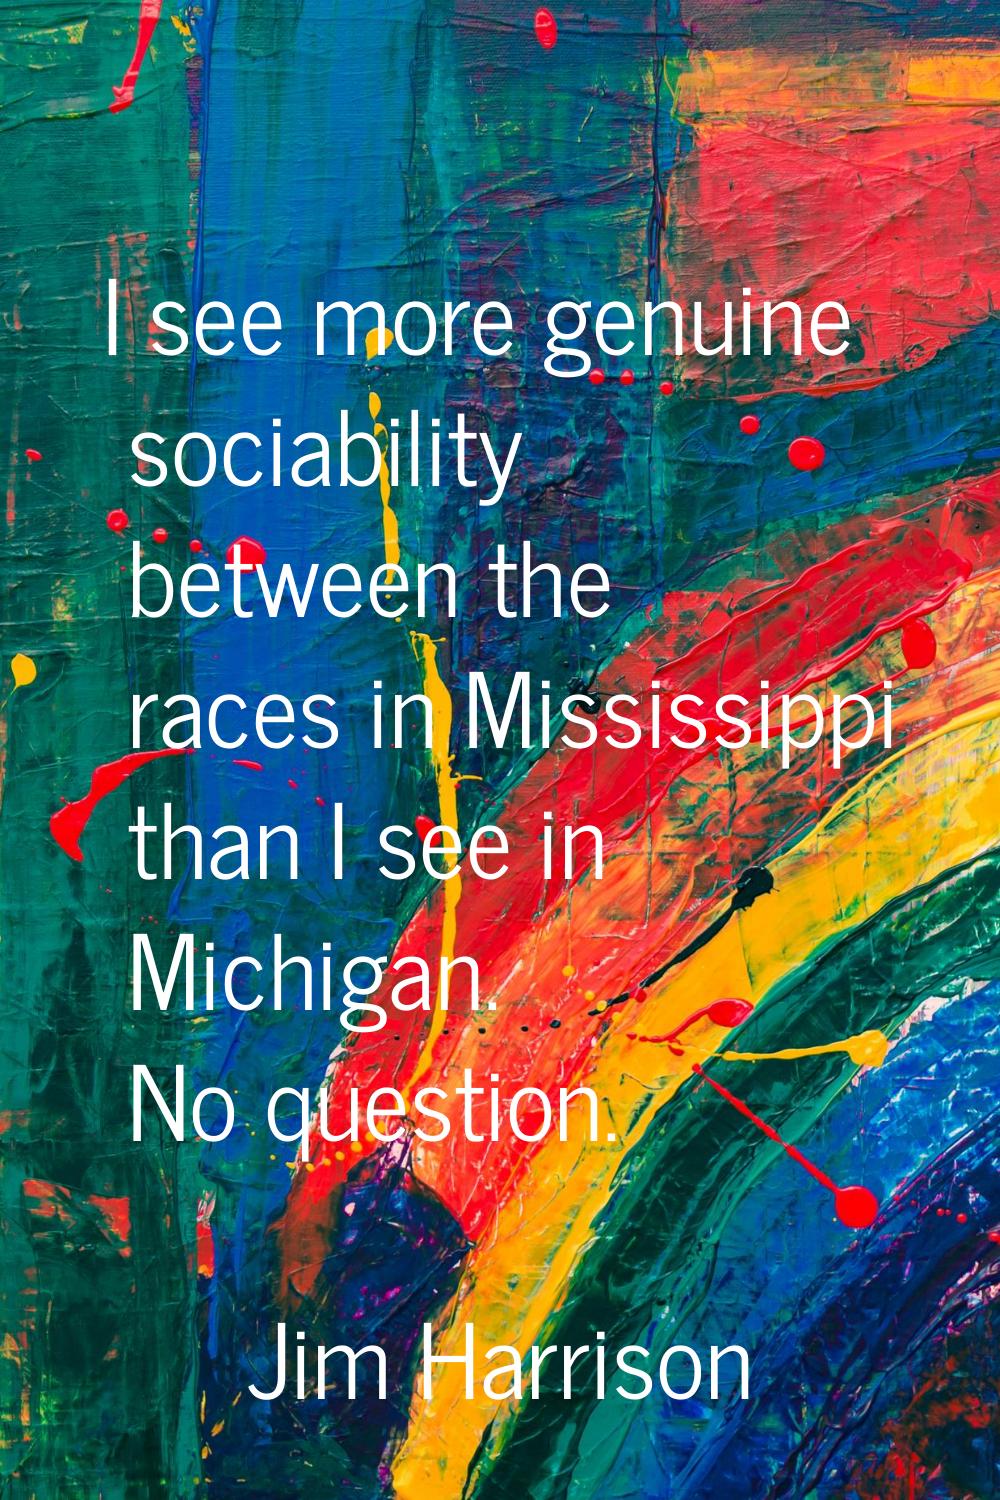 I see more genuine sociability between the races in Mississippi than I see in Michigan. No question